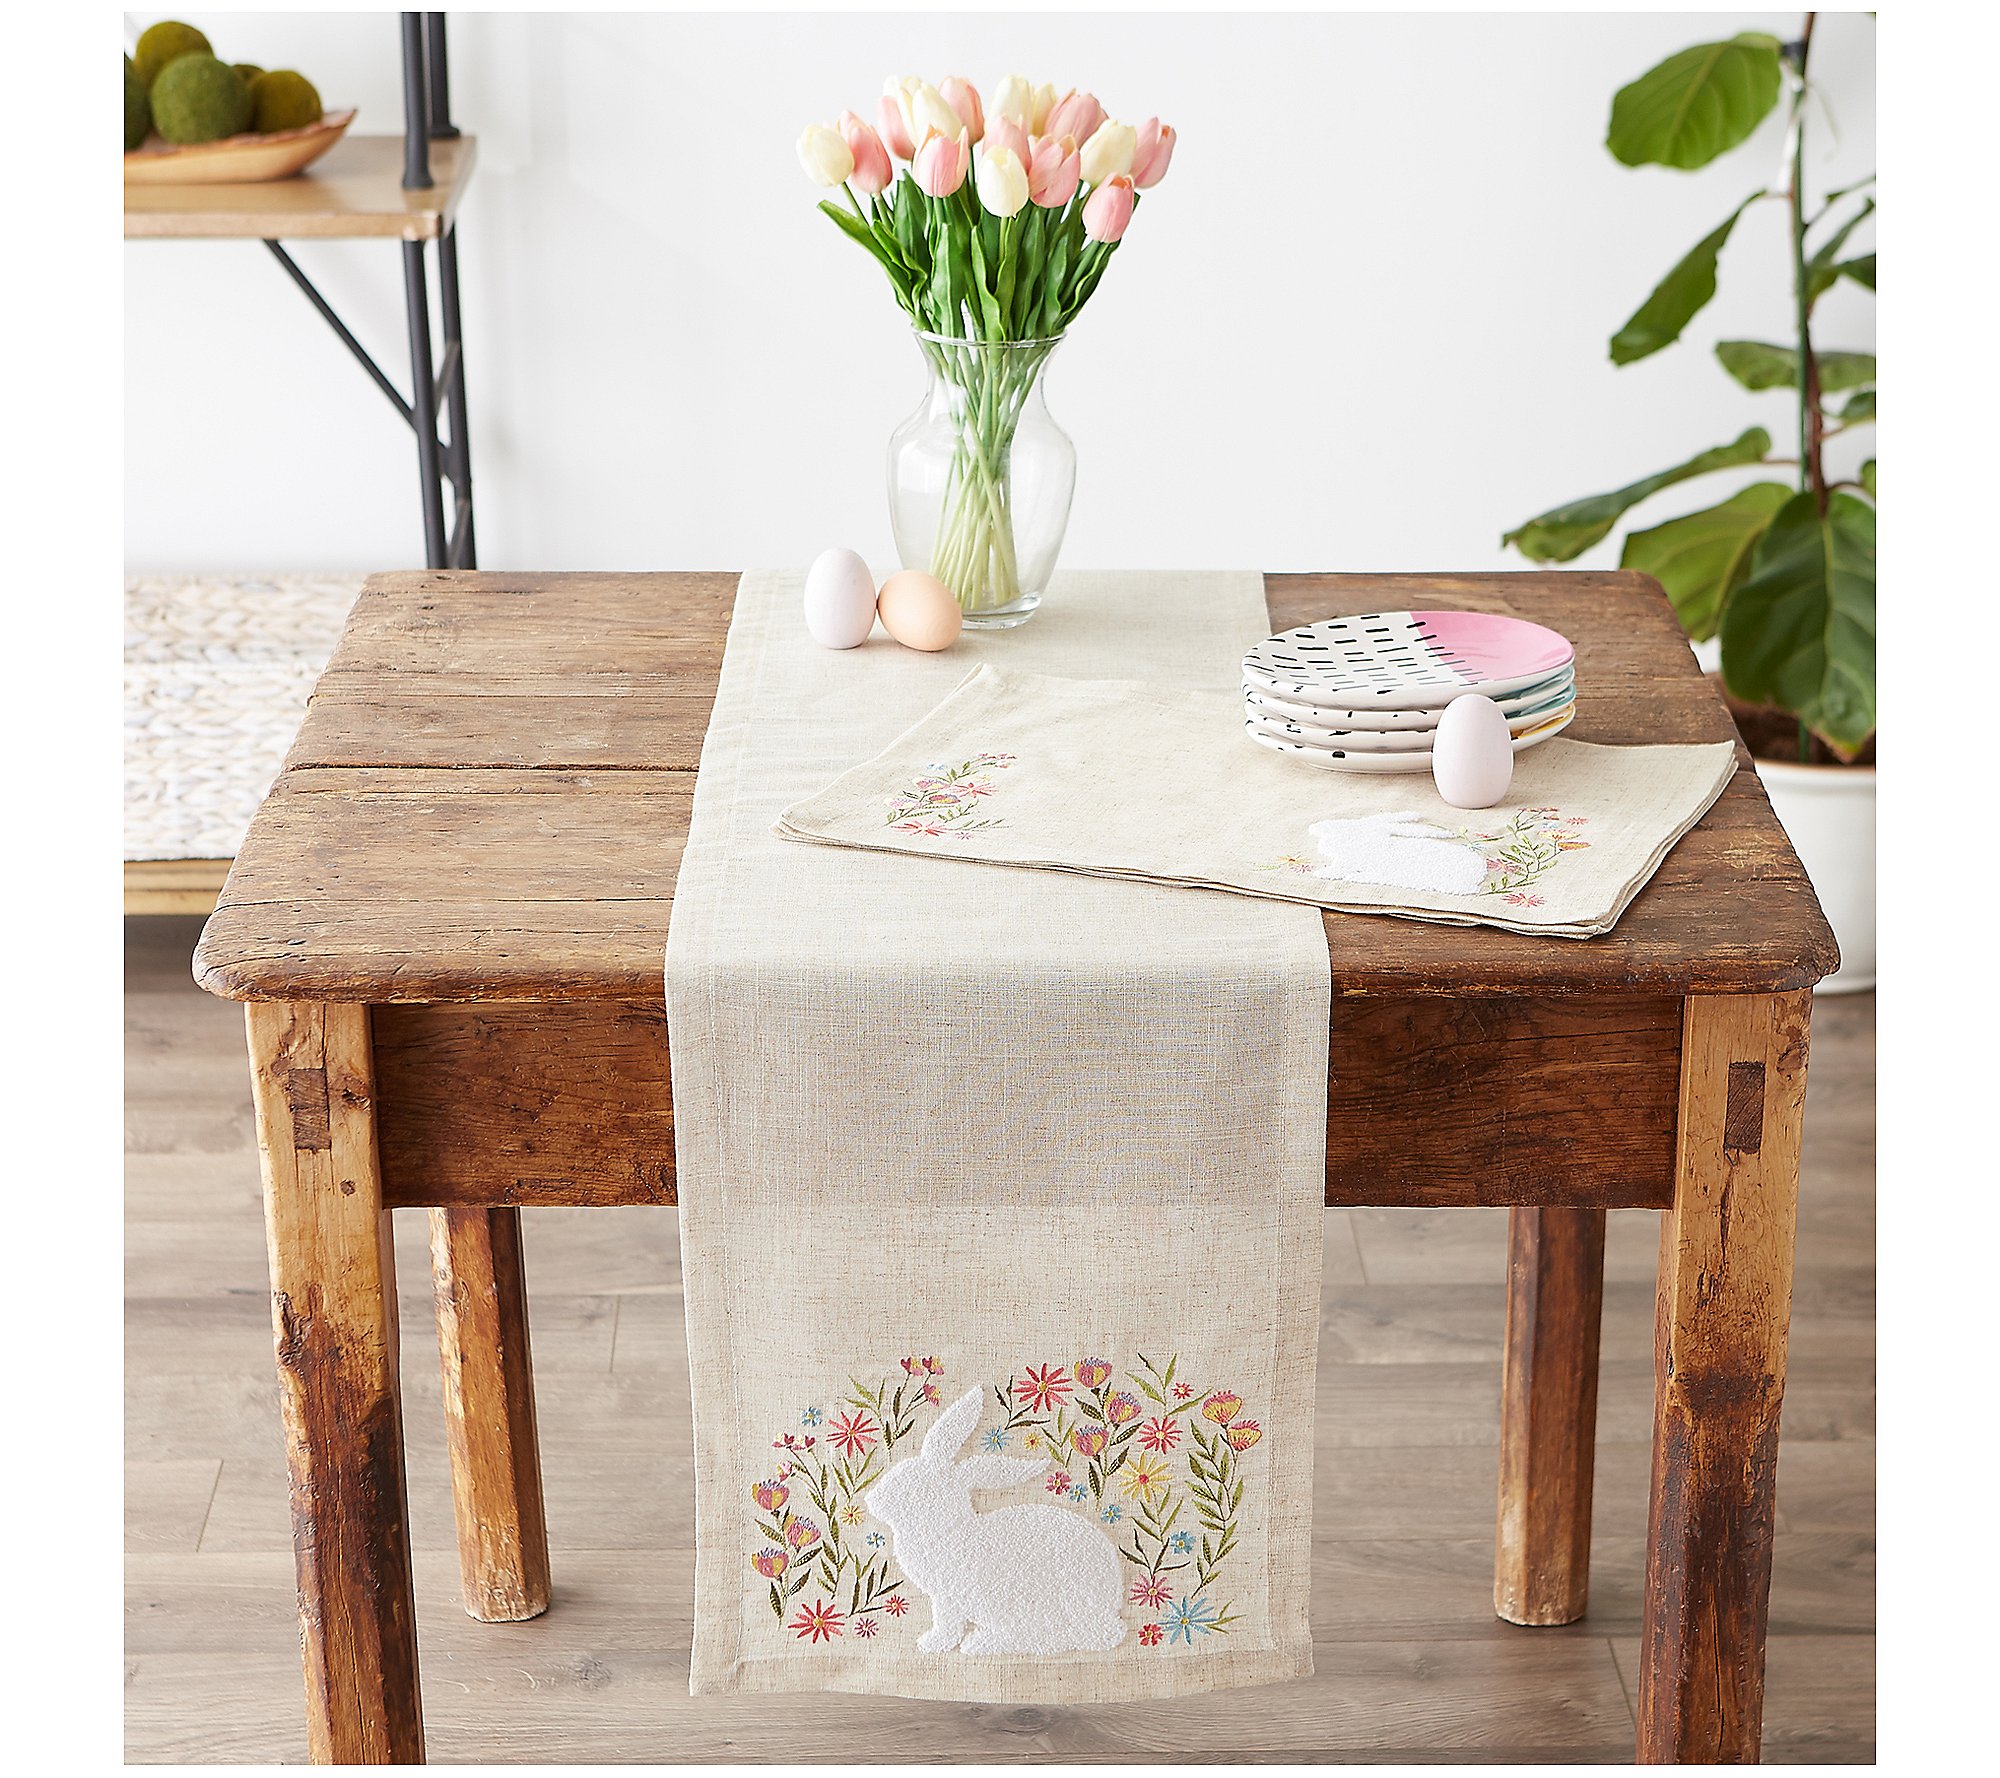 Design Imports 14 x 108 Spring Meadow Embroidered Table Runner